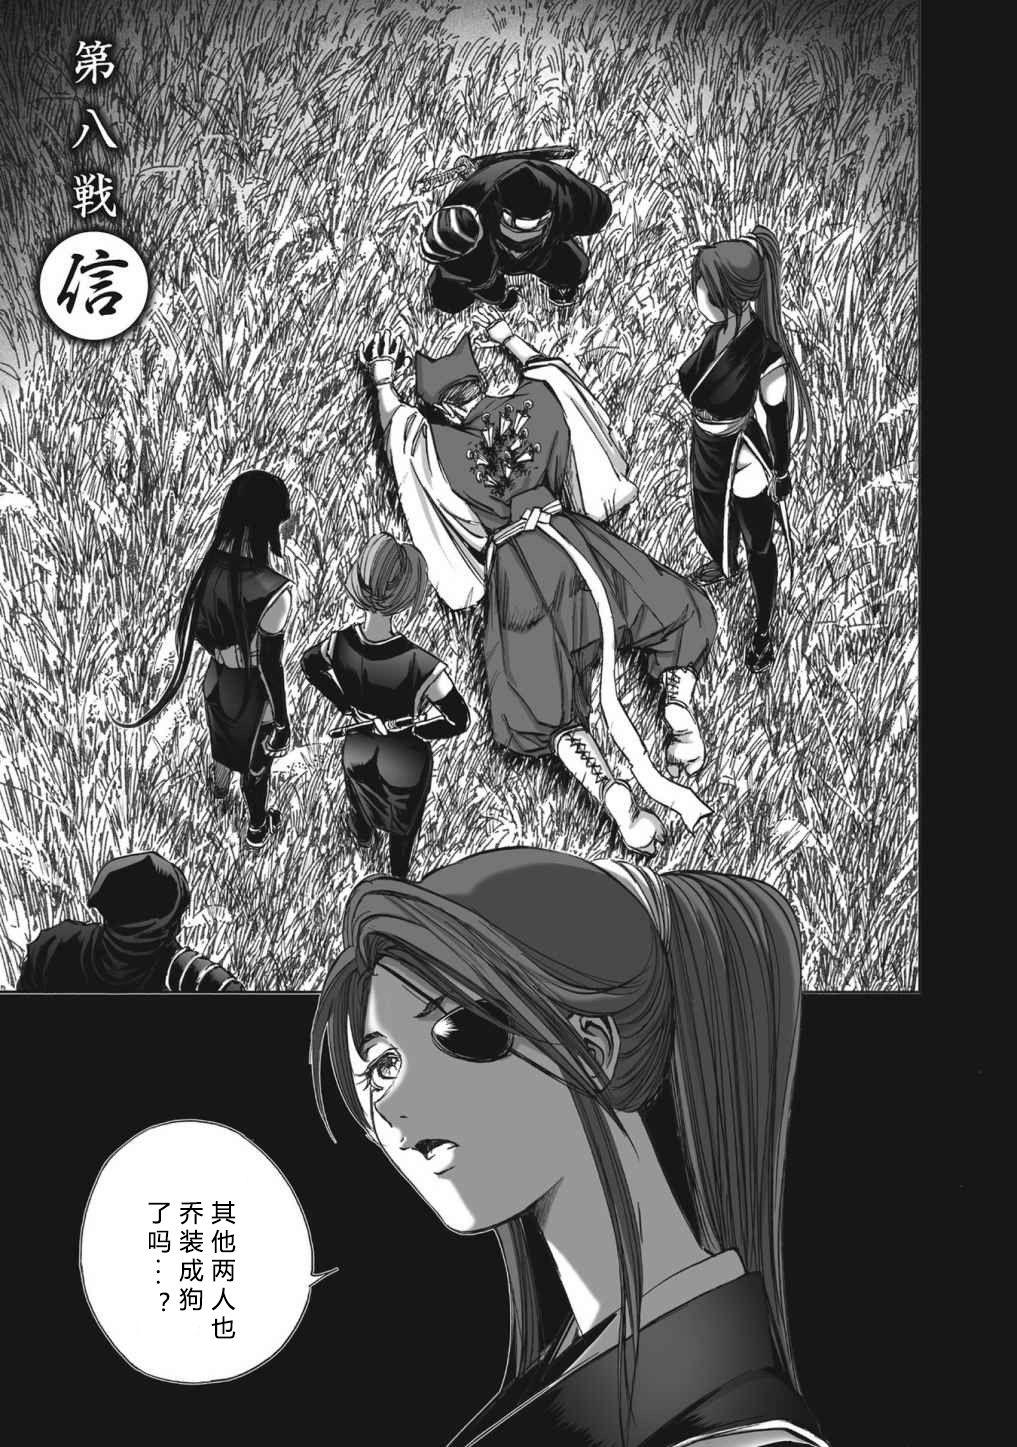 Indian エイトドッグス～忍法八犬伝～ 2【希月学园汉化组】 Exgirlfriend - Page 7